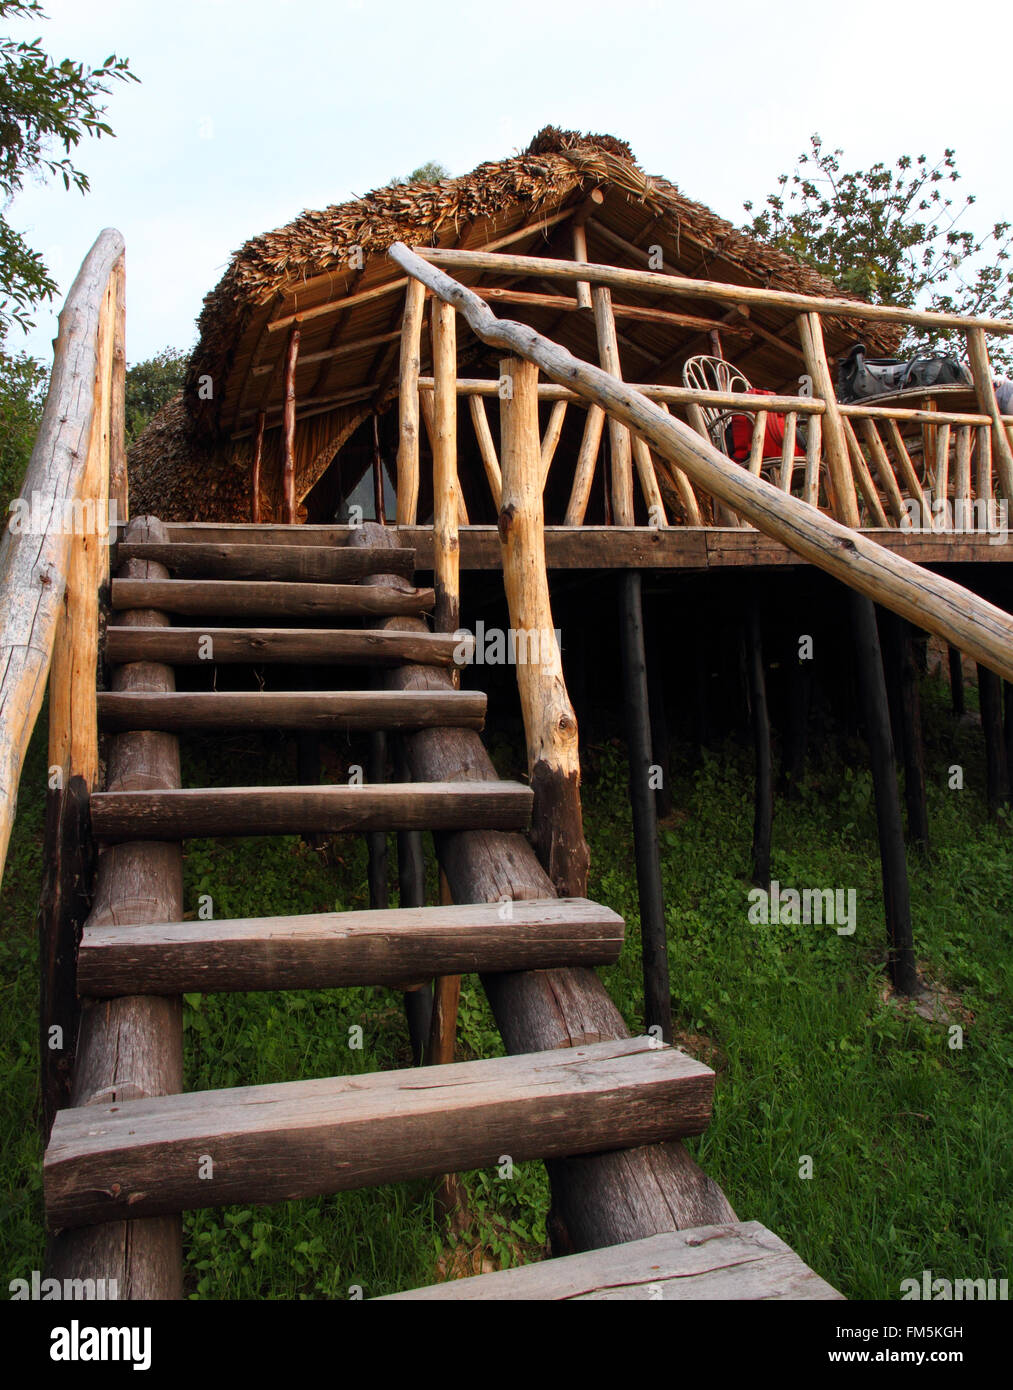 A rugged wooden staircase leading up to a rustic wooden and thatch hotel room built on stilts in the forest. Stock Photo